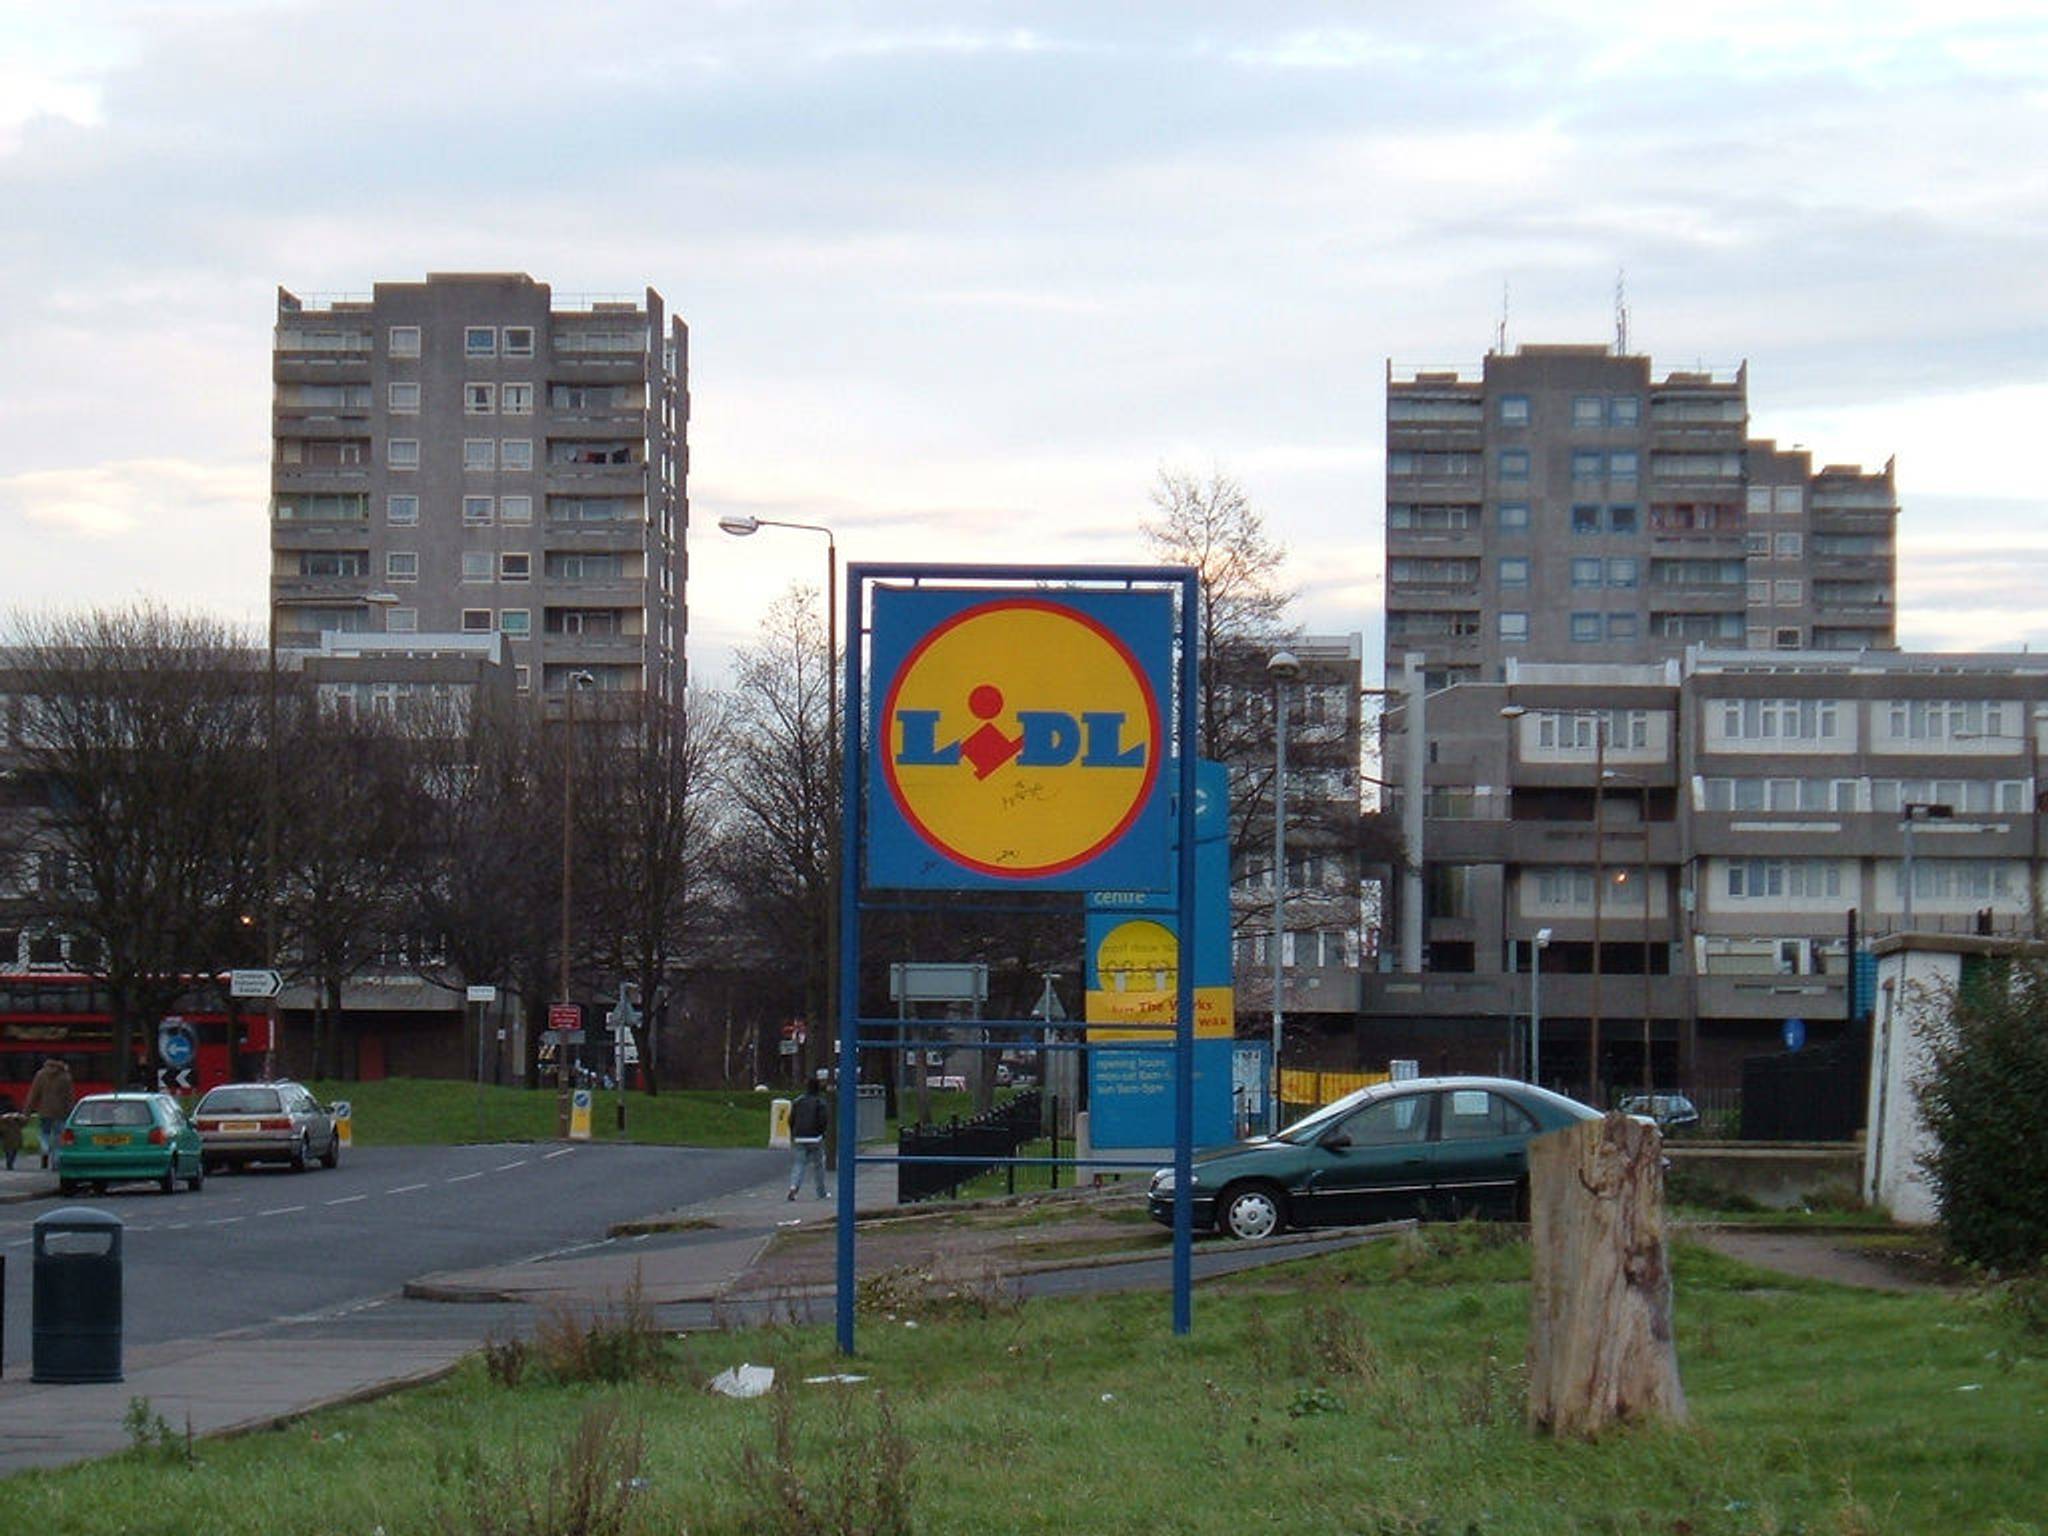 Lidl shaking off its discount image